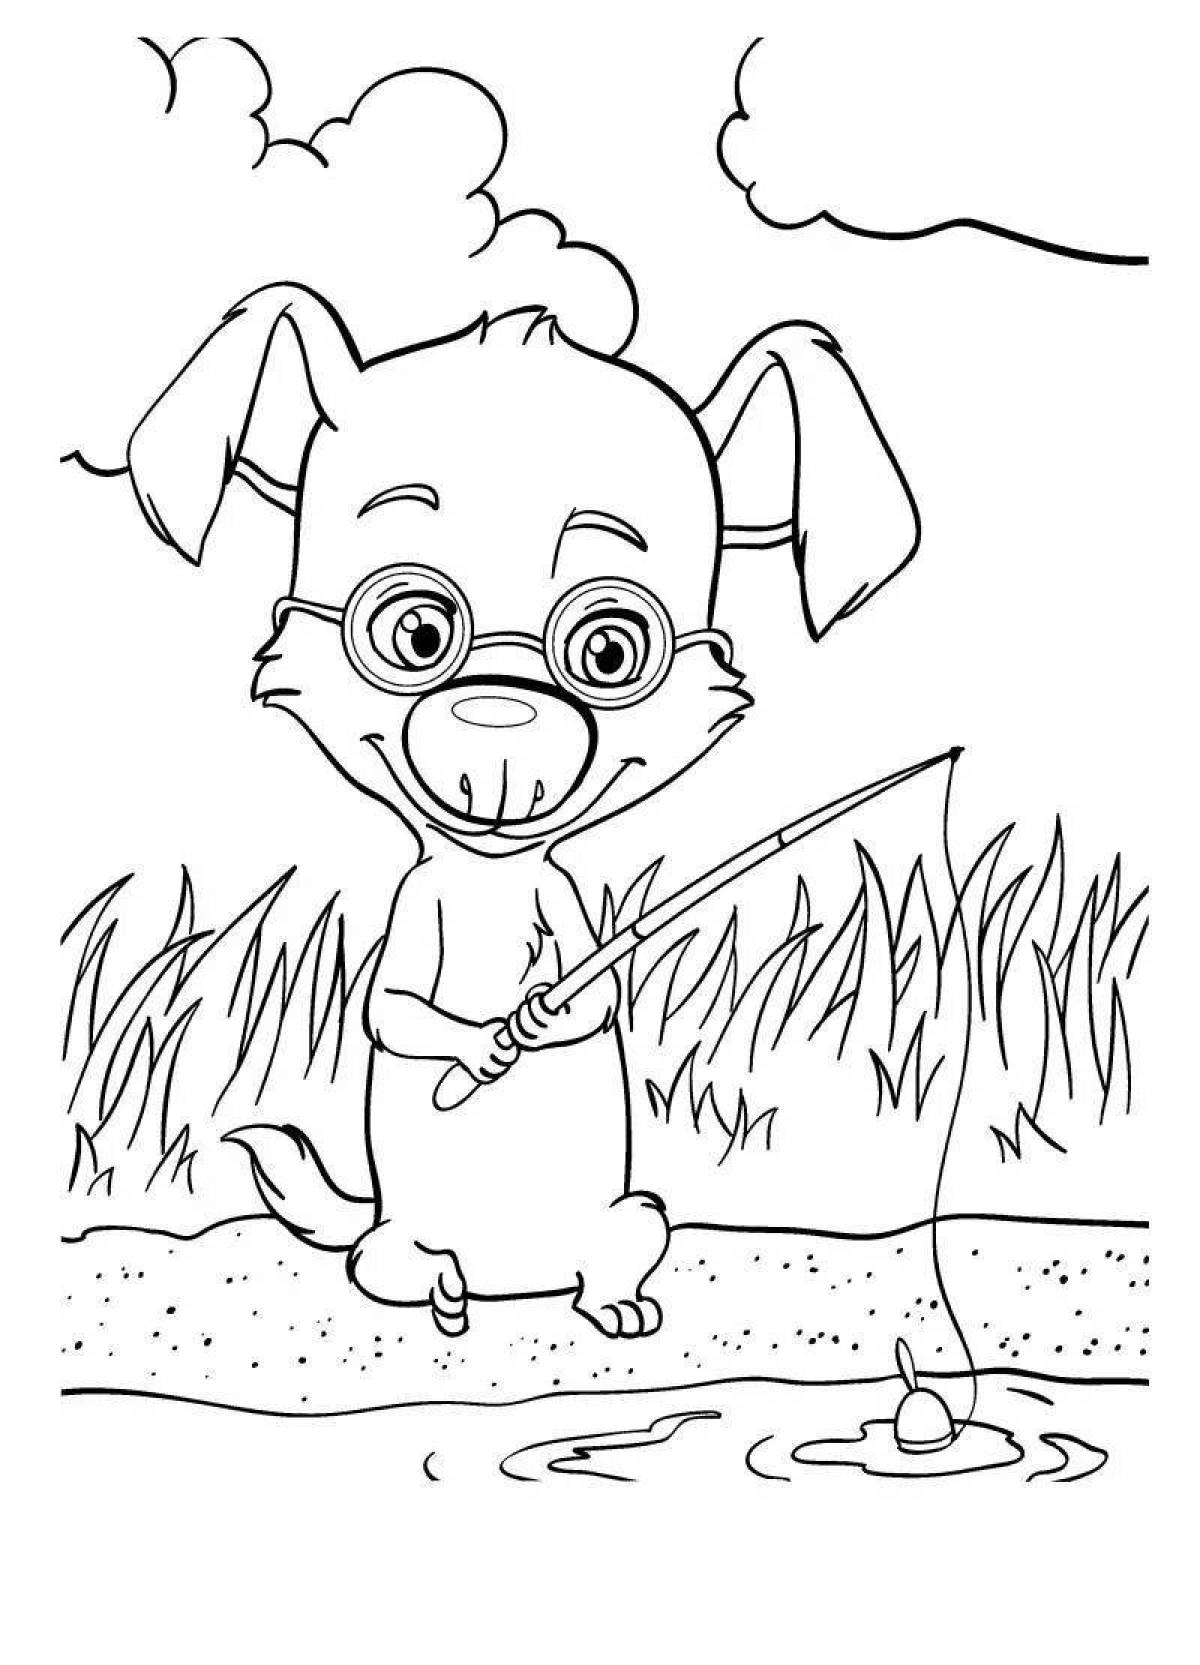 Animated squirrel and arrow coloring page